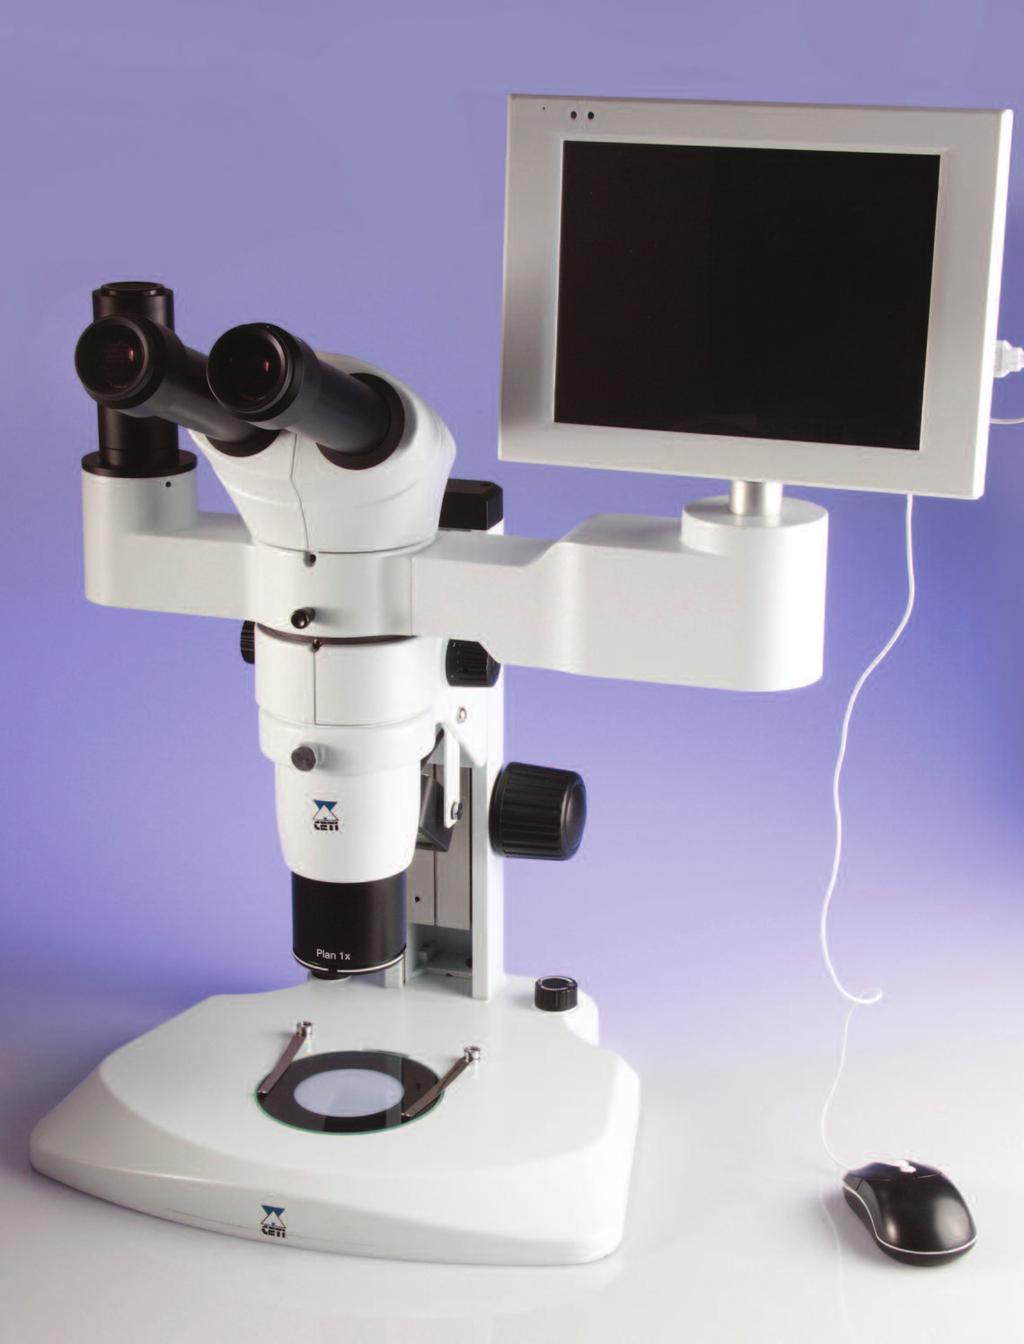 Digital Varizoom 8 LED Stereo Illumination with Touch Screen This innovative LED Digital Microscope is a new system which features an embedded 8.